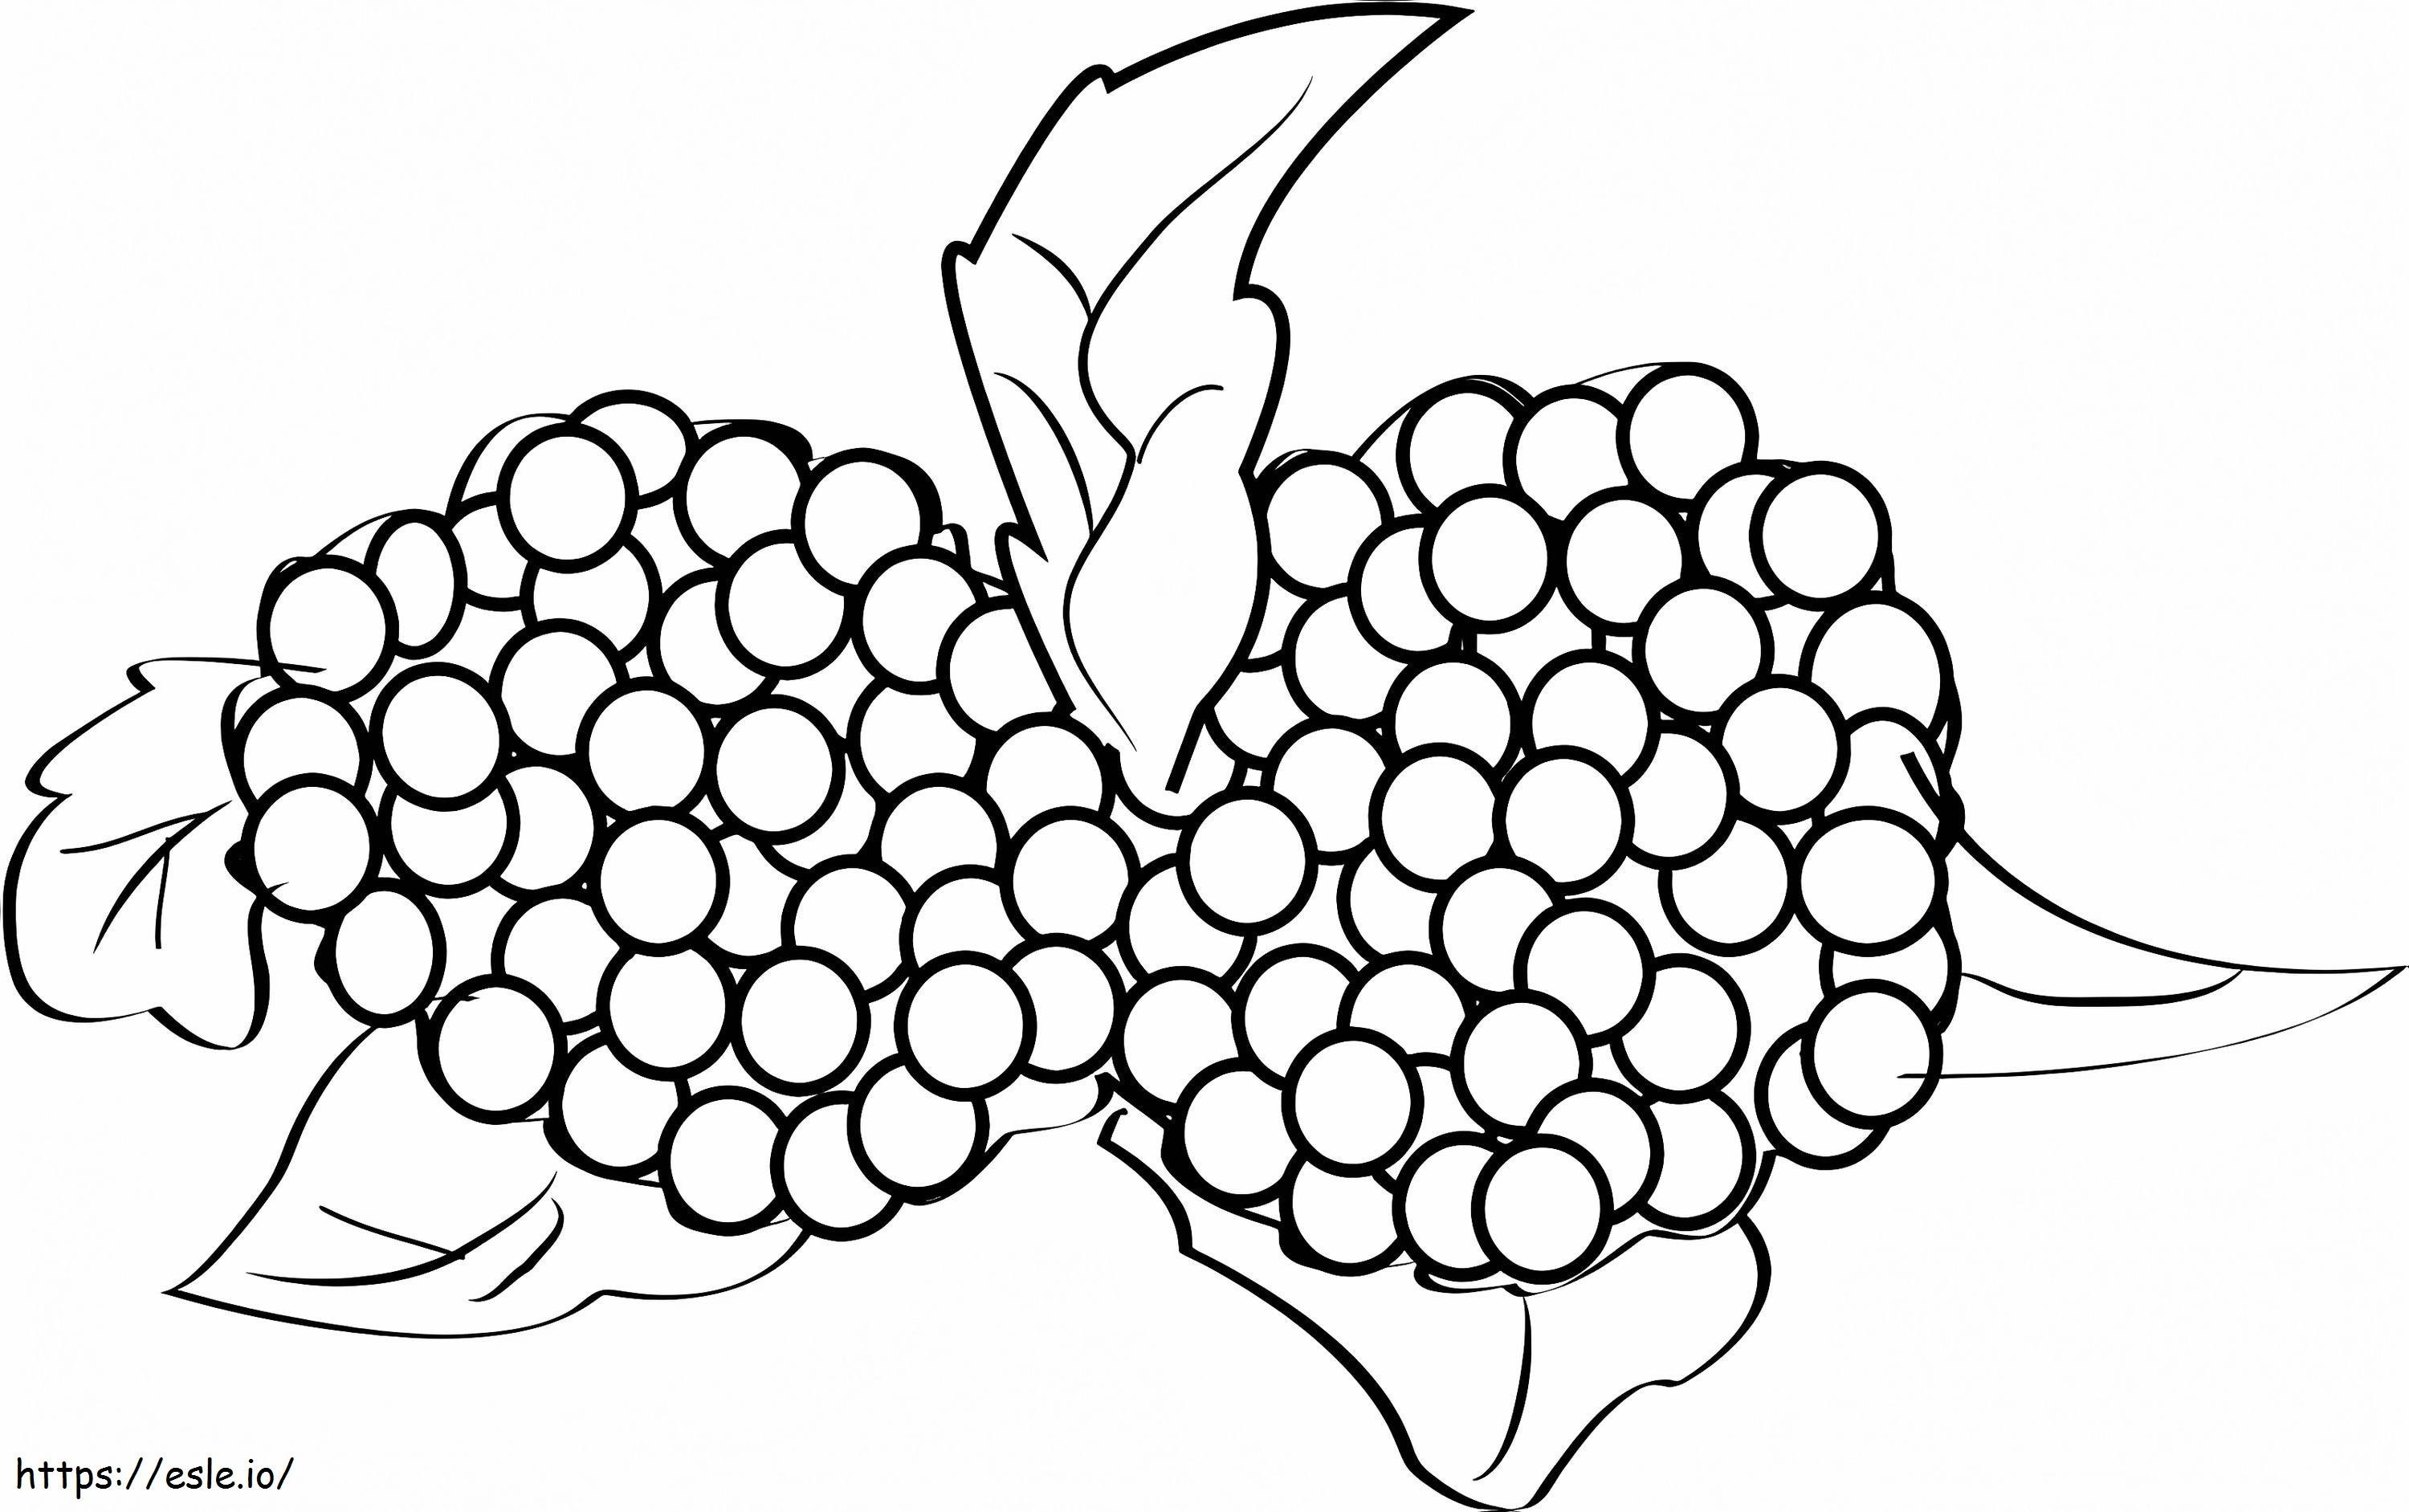 Two Blackberries coloring page